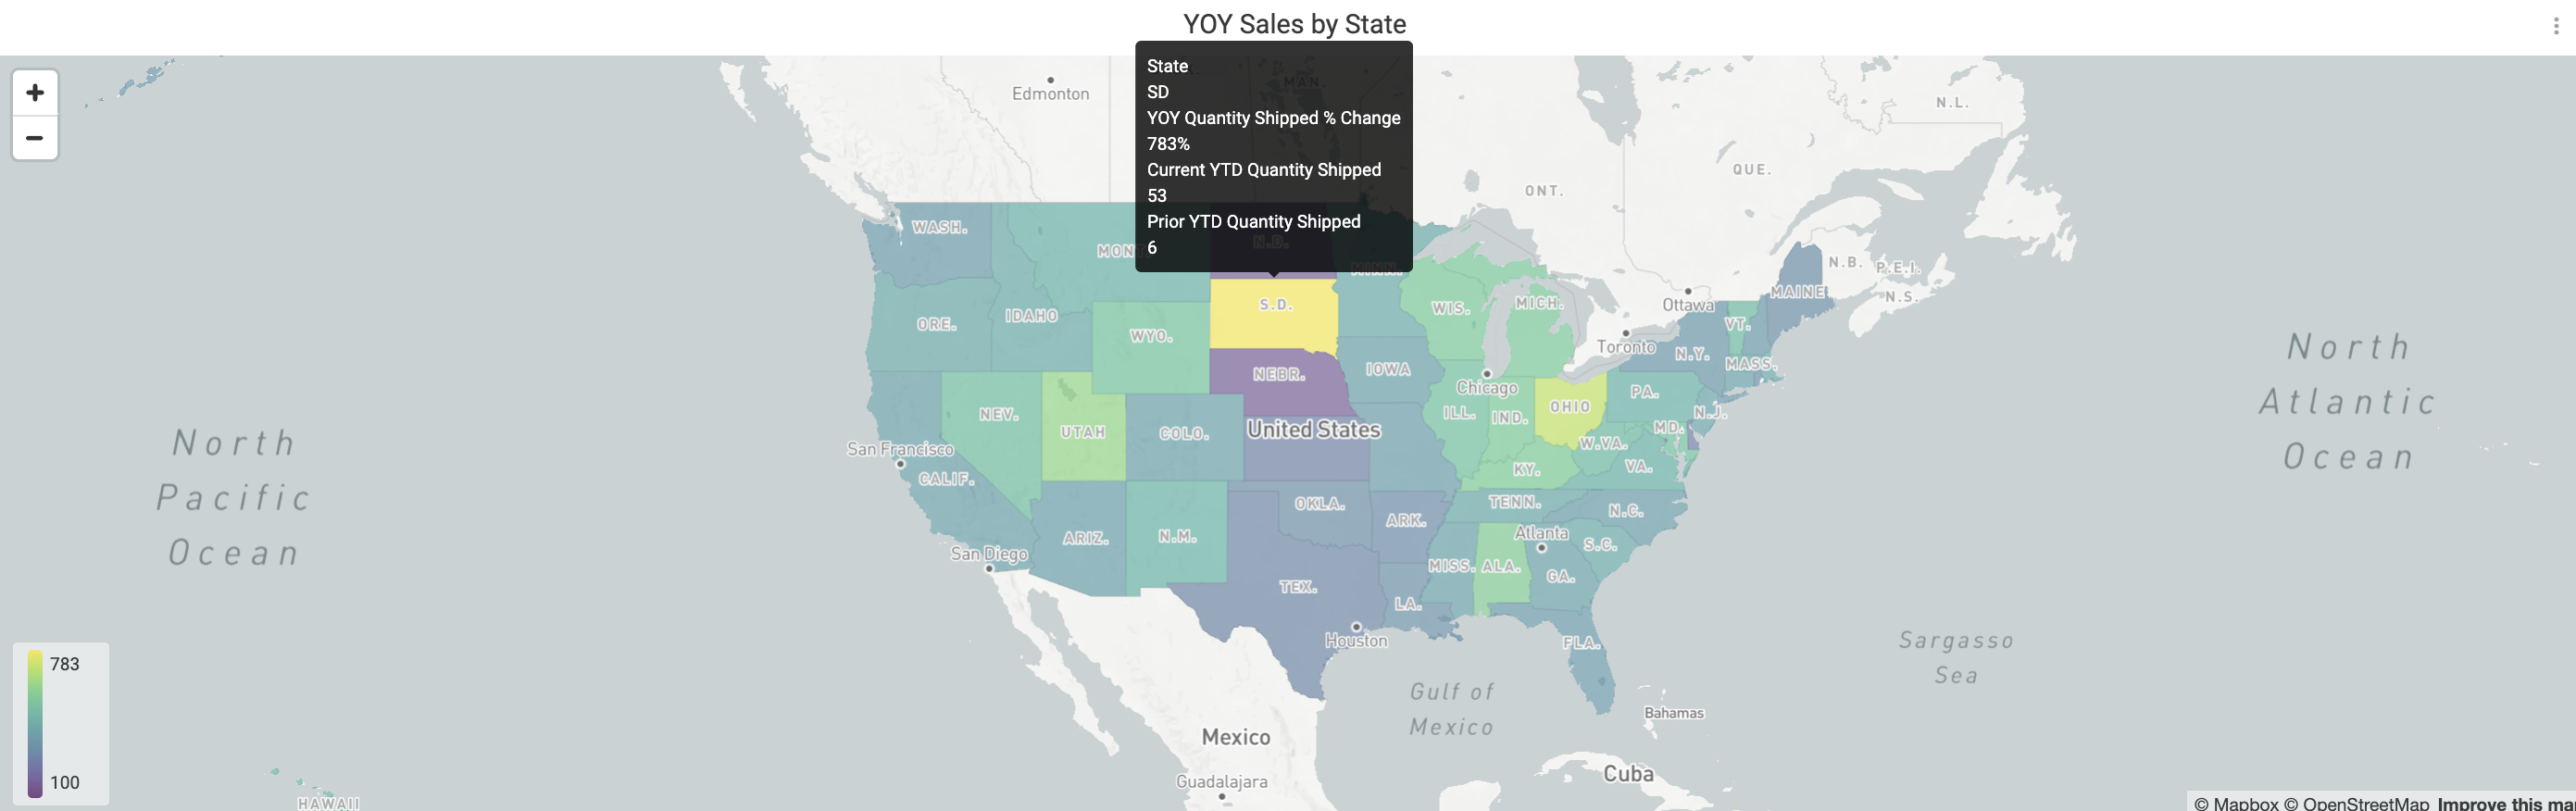 YOY_Sales_by_State.png